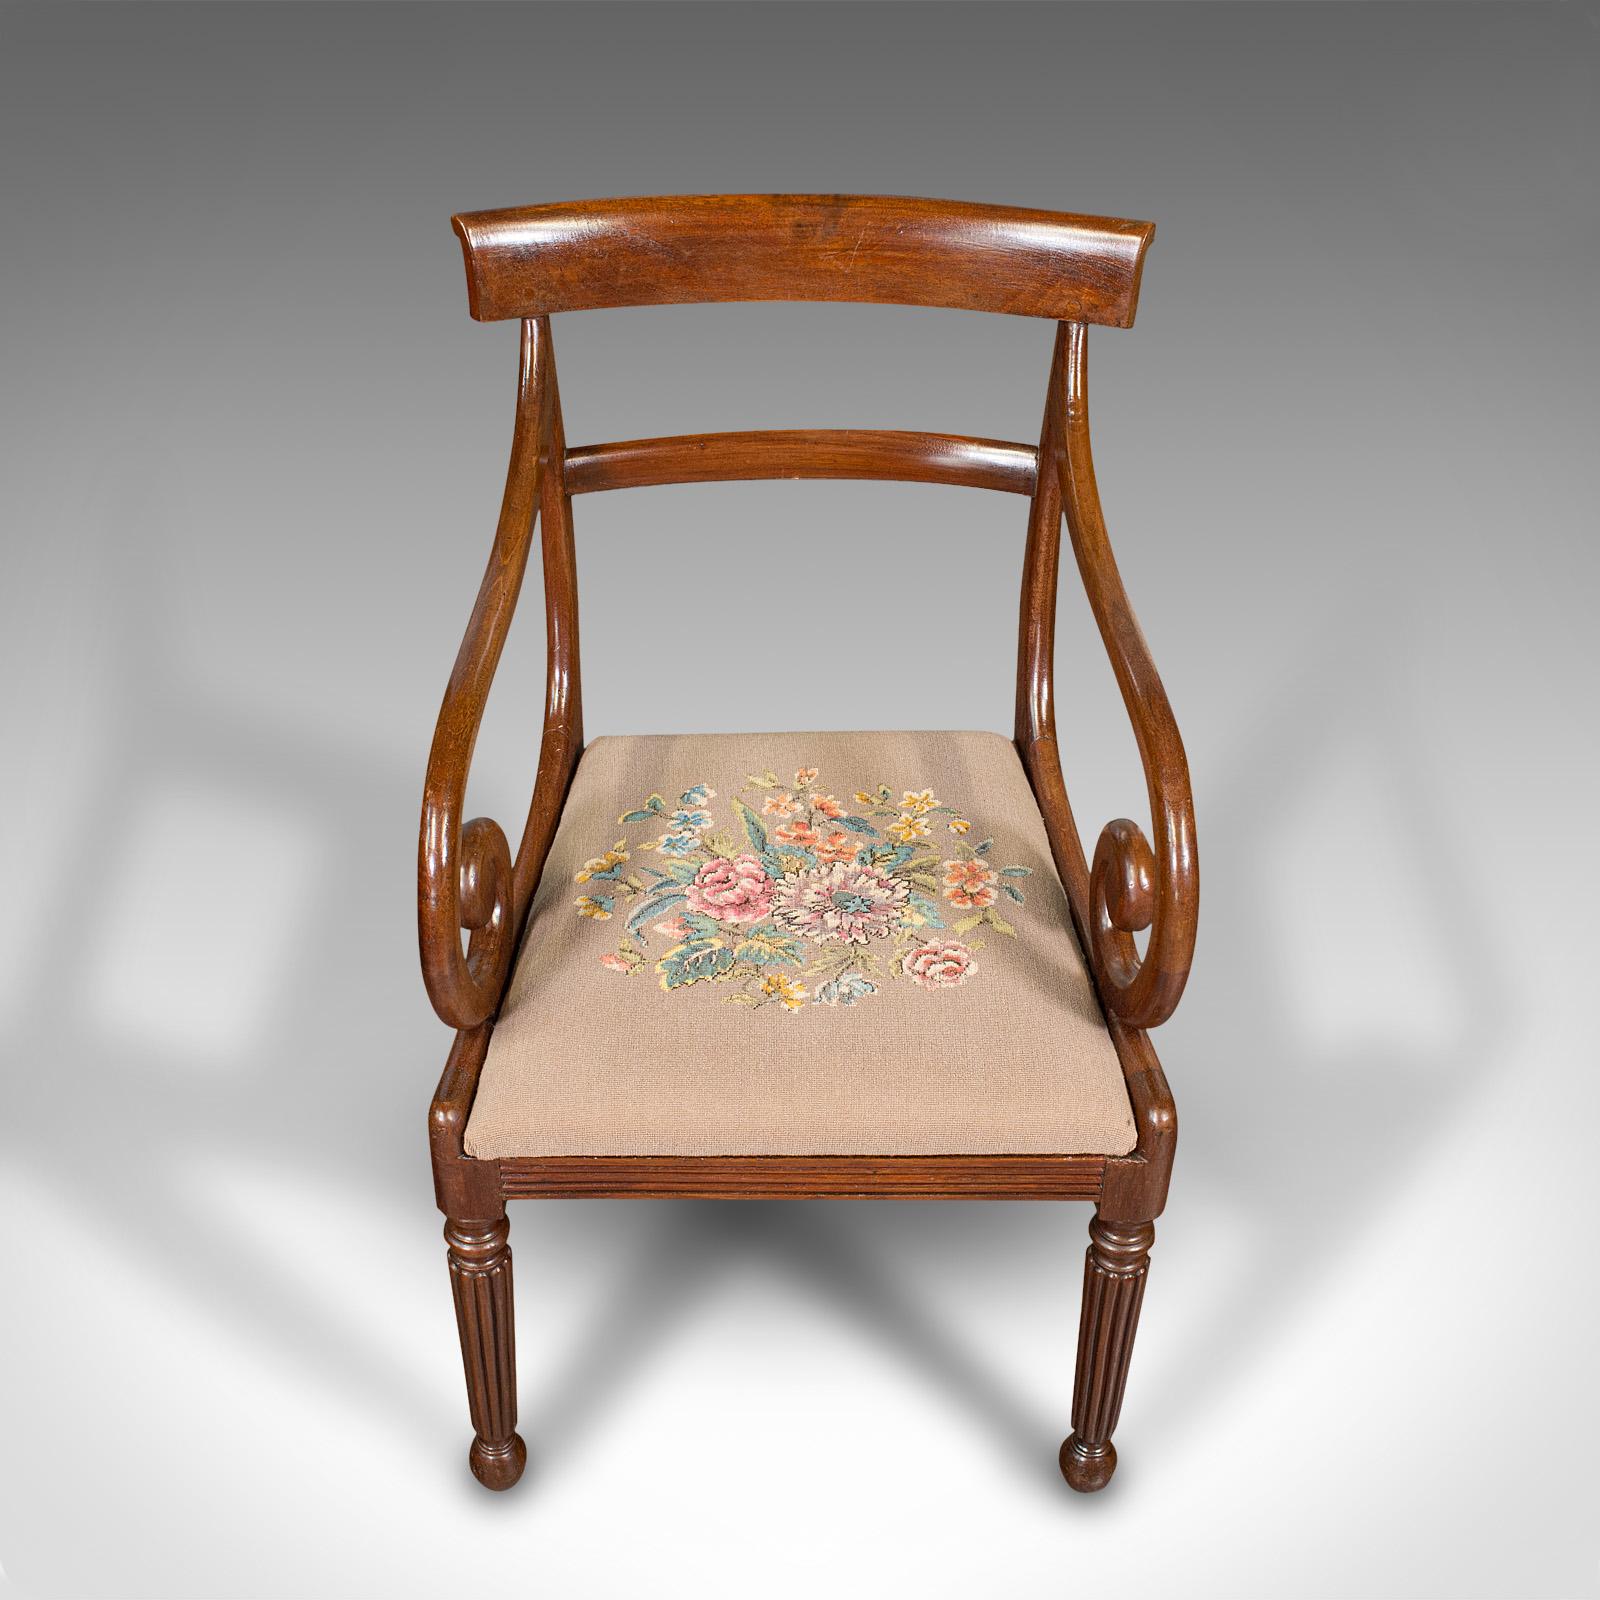 Antique Elbow Chair, English, Armchair, Needlepoint, Drop In Seat, Late Georgian For Sale 1